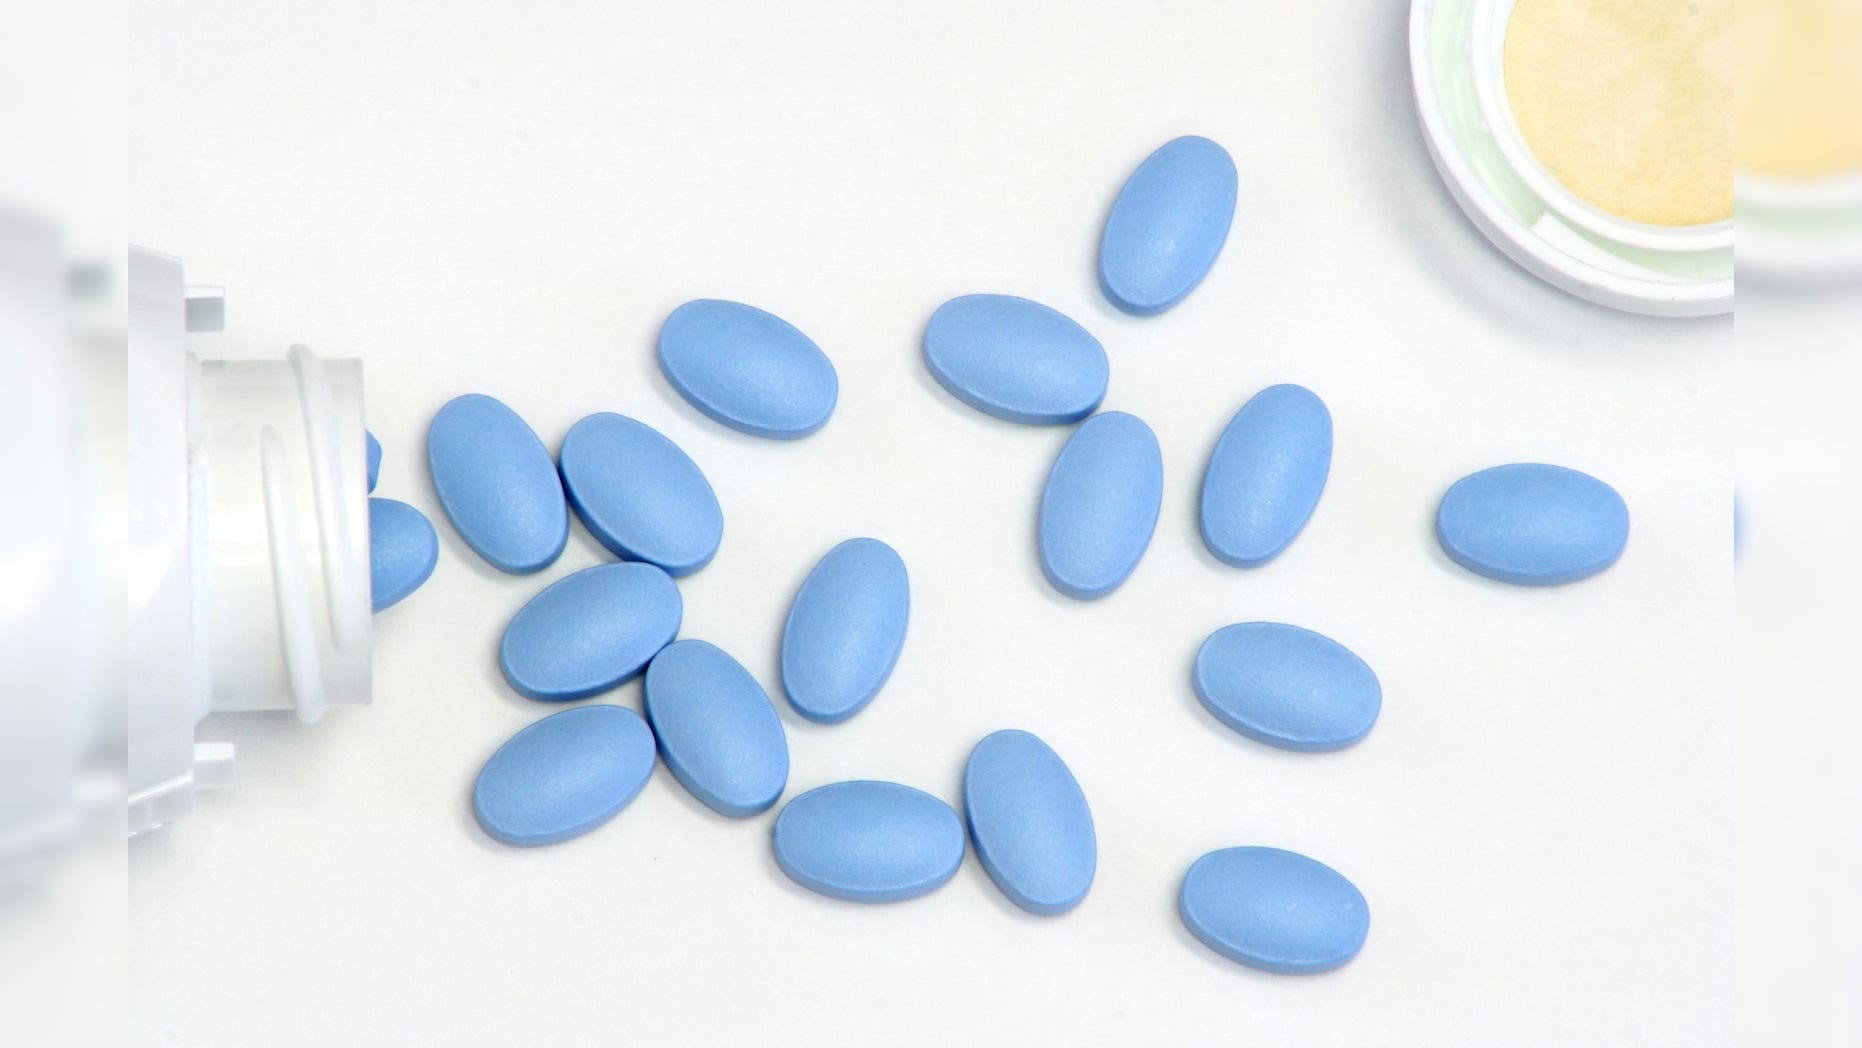 Viagra may help men with coronary artery disease to live longer, study suggests